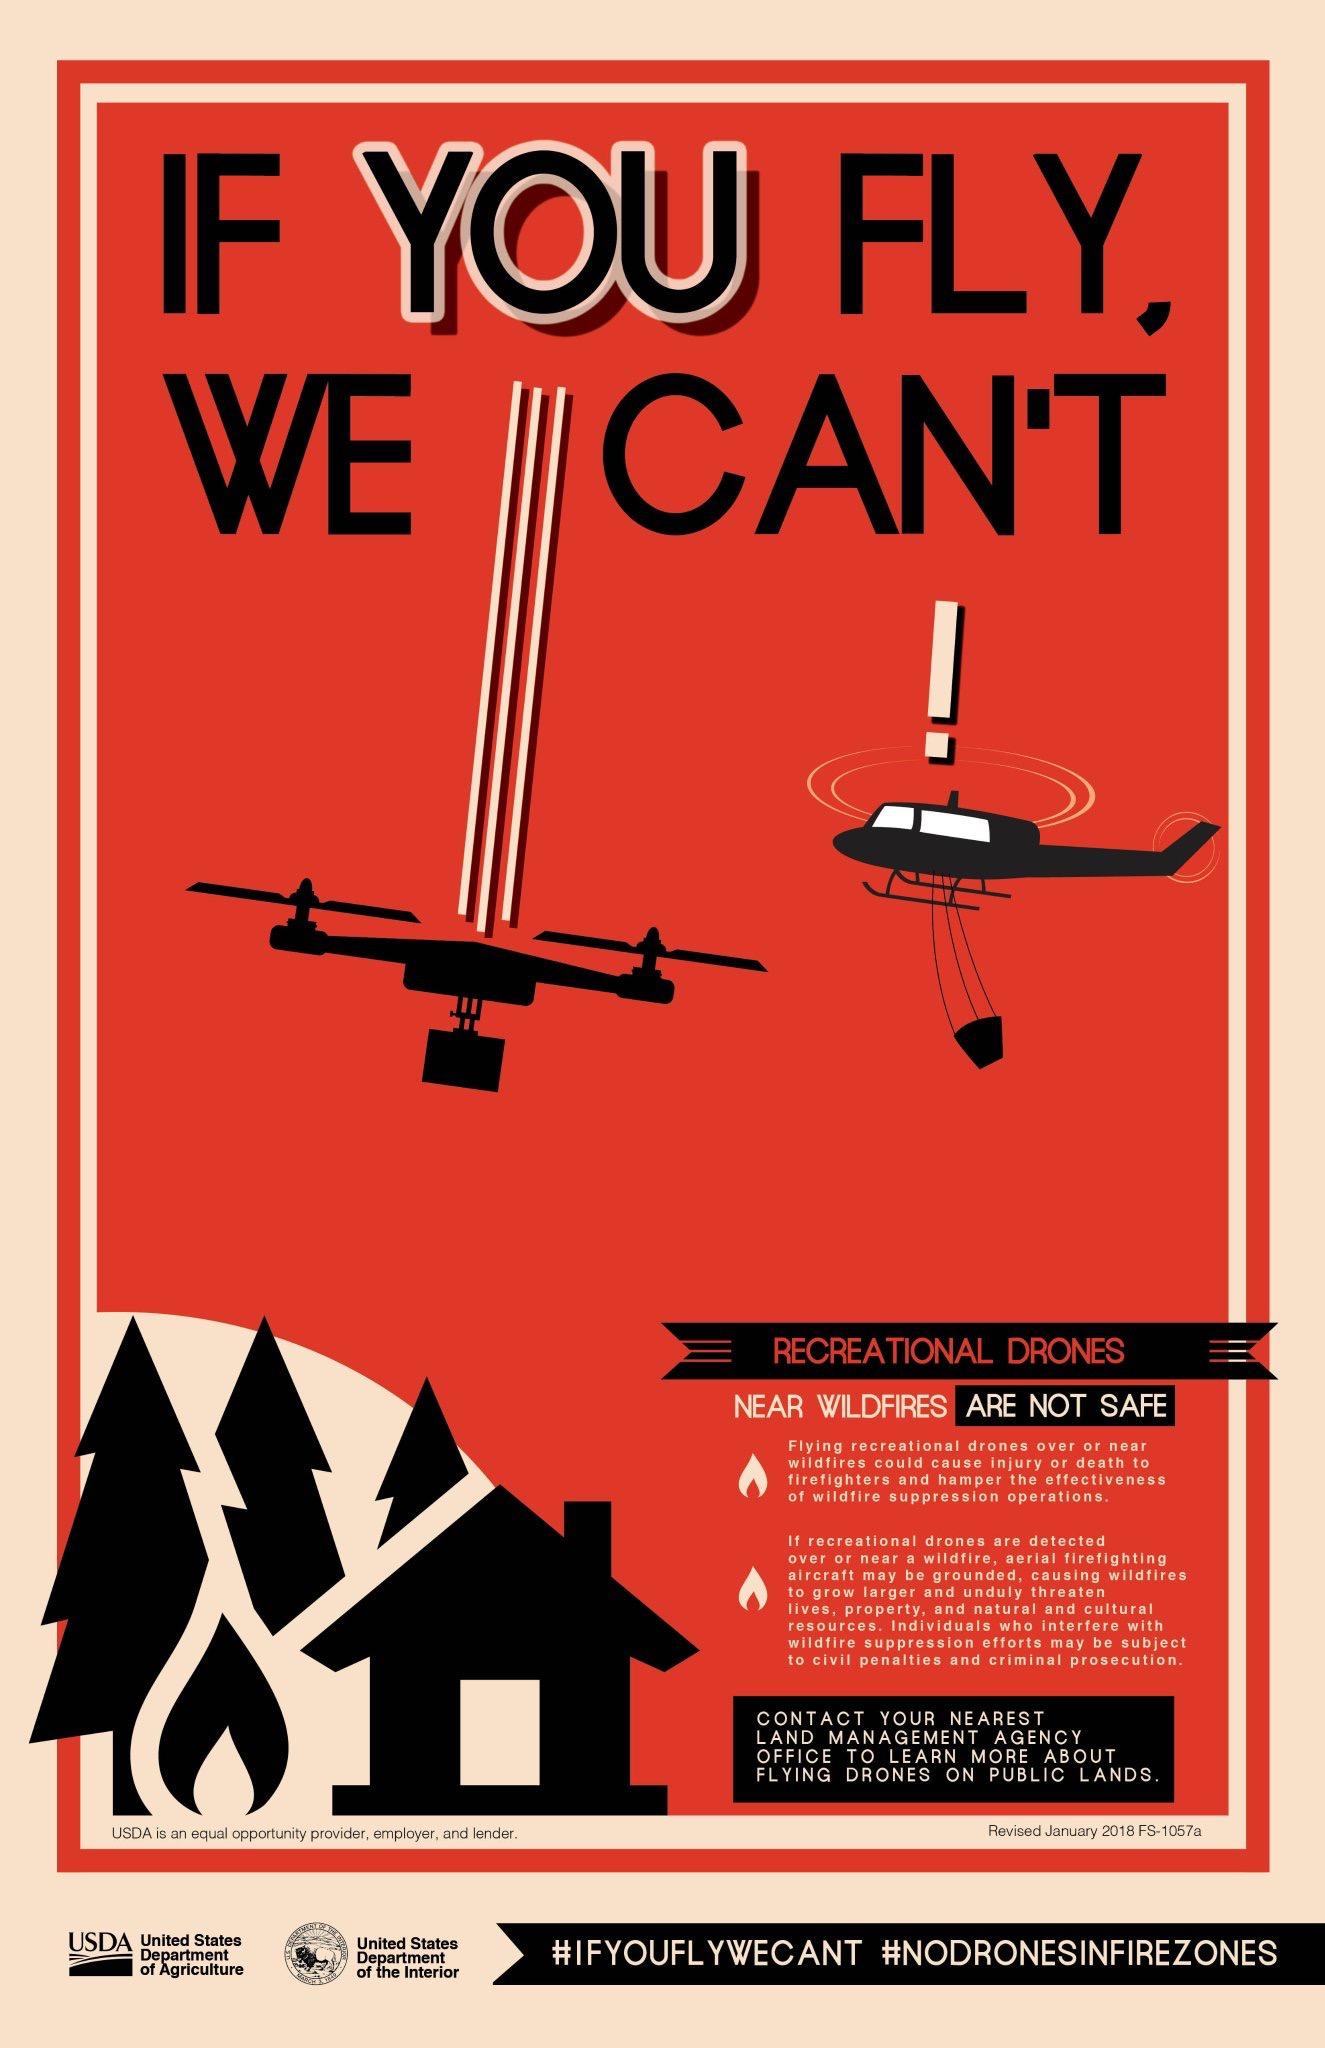 Recreational drone in the sky almost colliding with helicopter flying over a wildfire encroaching near a house. Message says 'If you fly we can't'. 